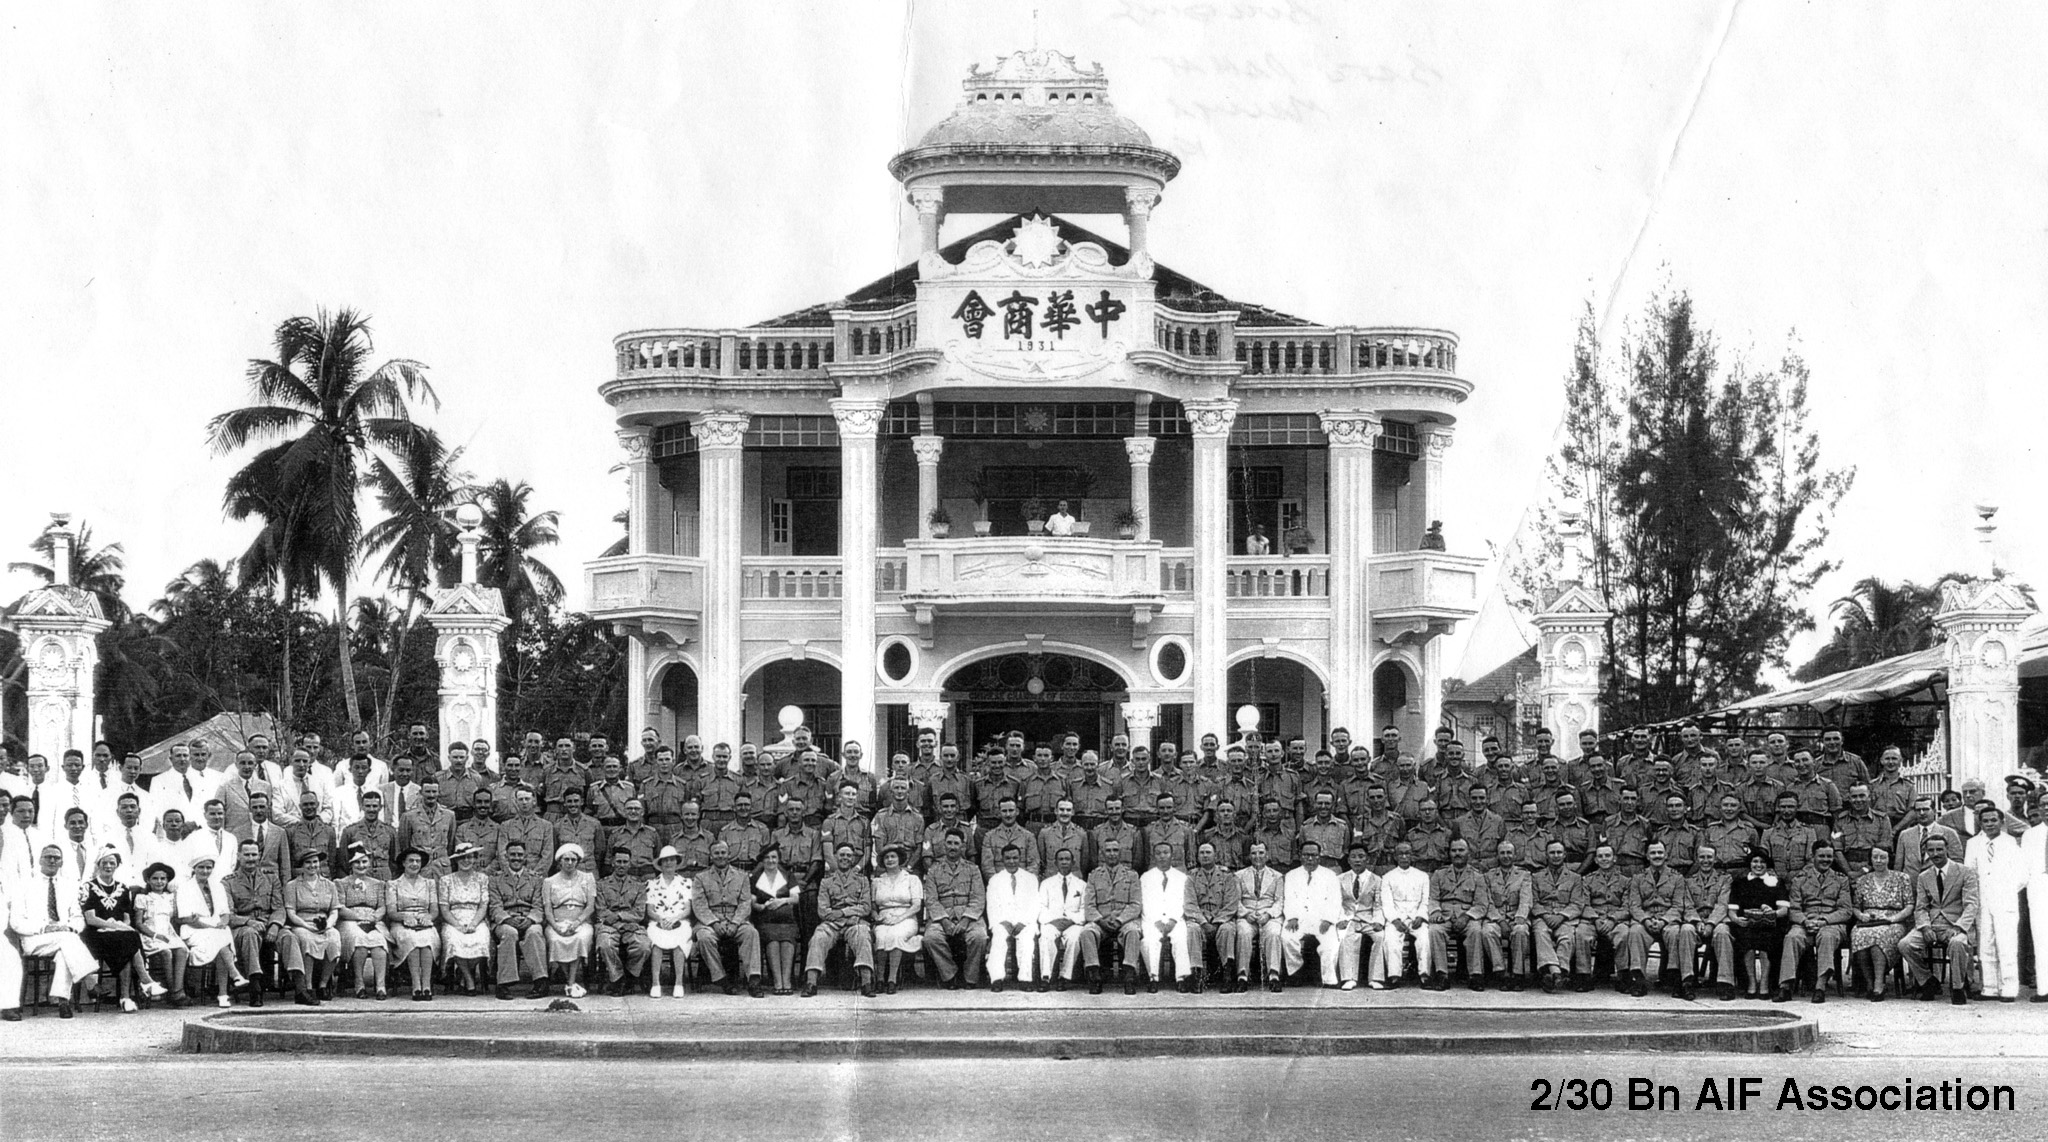 Batu Pahat Chinese Chamber of Commerce, Large Image (719kb)
Officers, NCO's & men of the 2/30 Battalion, and local citizens pose outside the Chinese Chamber of Commerce building in Batu Pahat, Malaya, 1941.

The Japanese later executed many of the Chinese businessman in the photo. This was because they were beleived to have aided the Chinese war effort against the Japanese invaders in China.
Keywords: batupahat